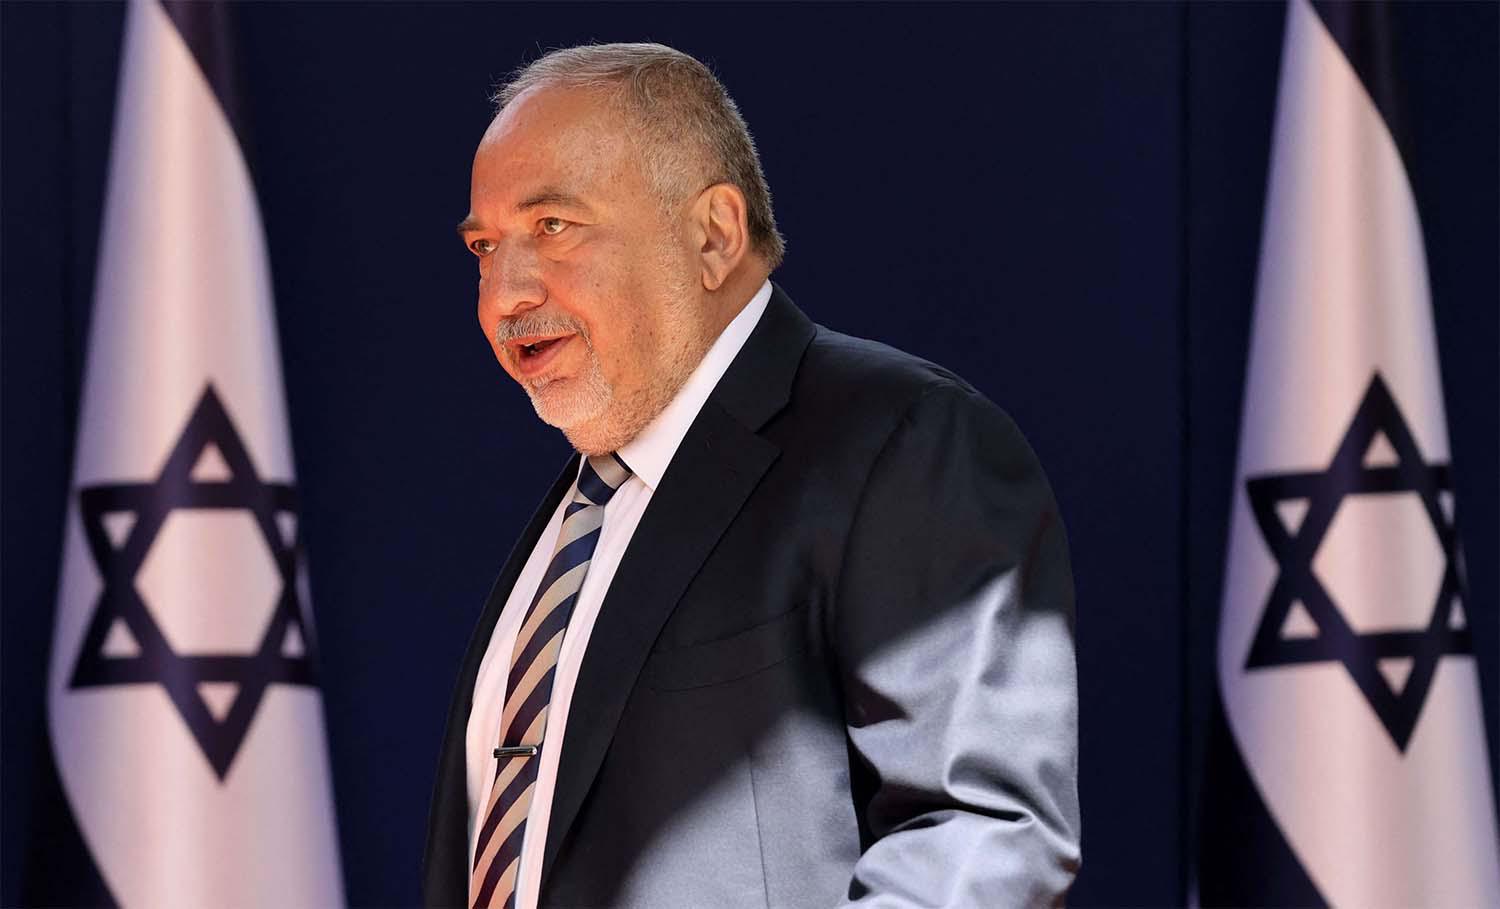 Liberman said the various coalition parties had agreed to draft a two-year budget within 140 days